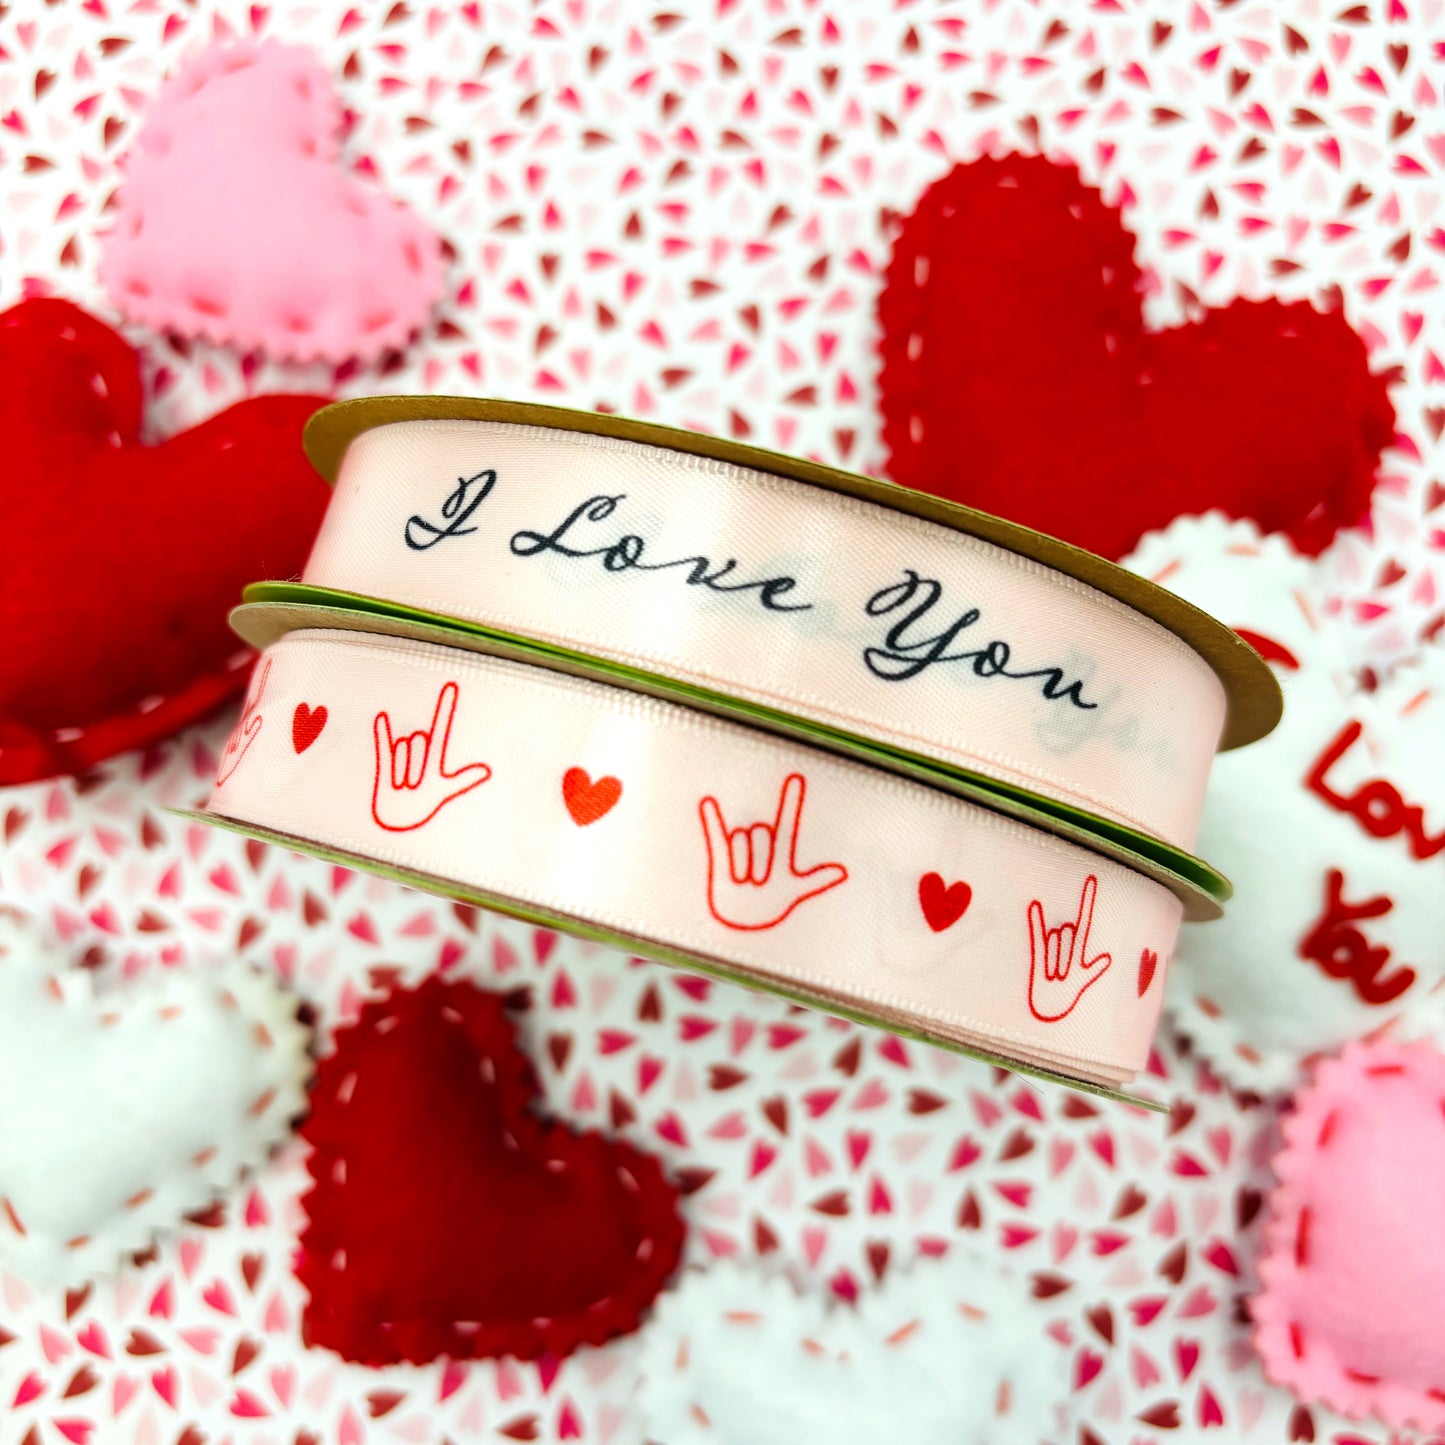 Sign Language ribbon I love you hand sign with a heart in red for Valentine's Day printed on 5/8" pink satin